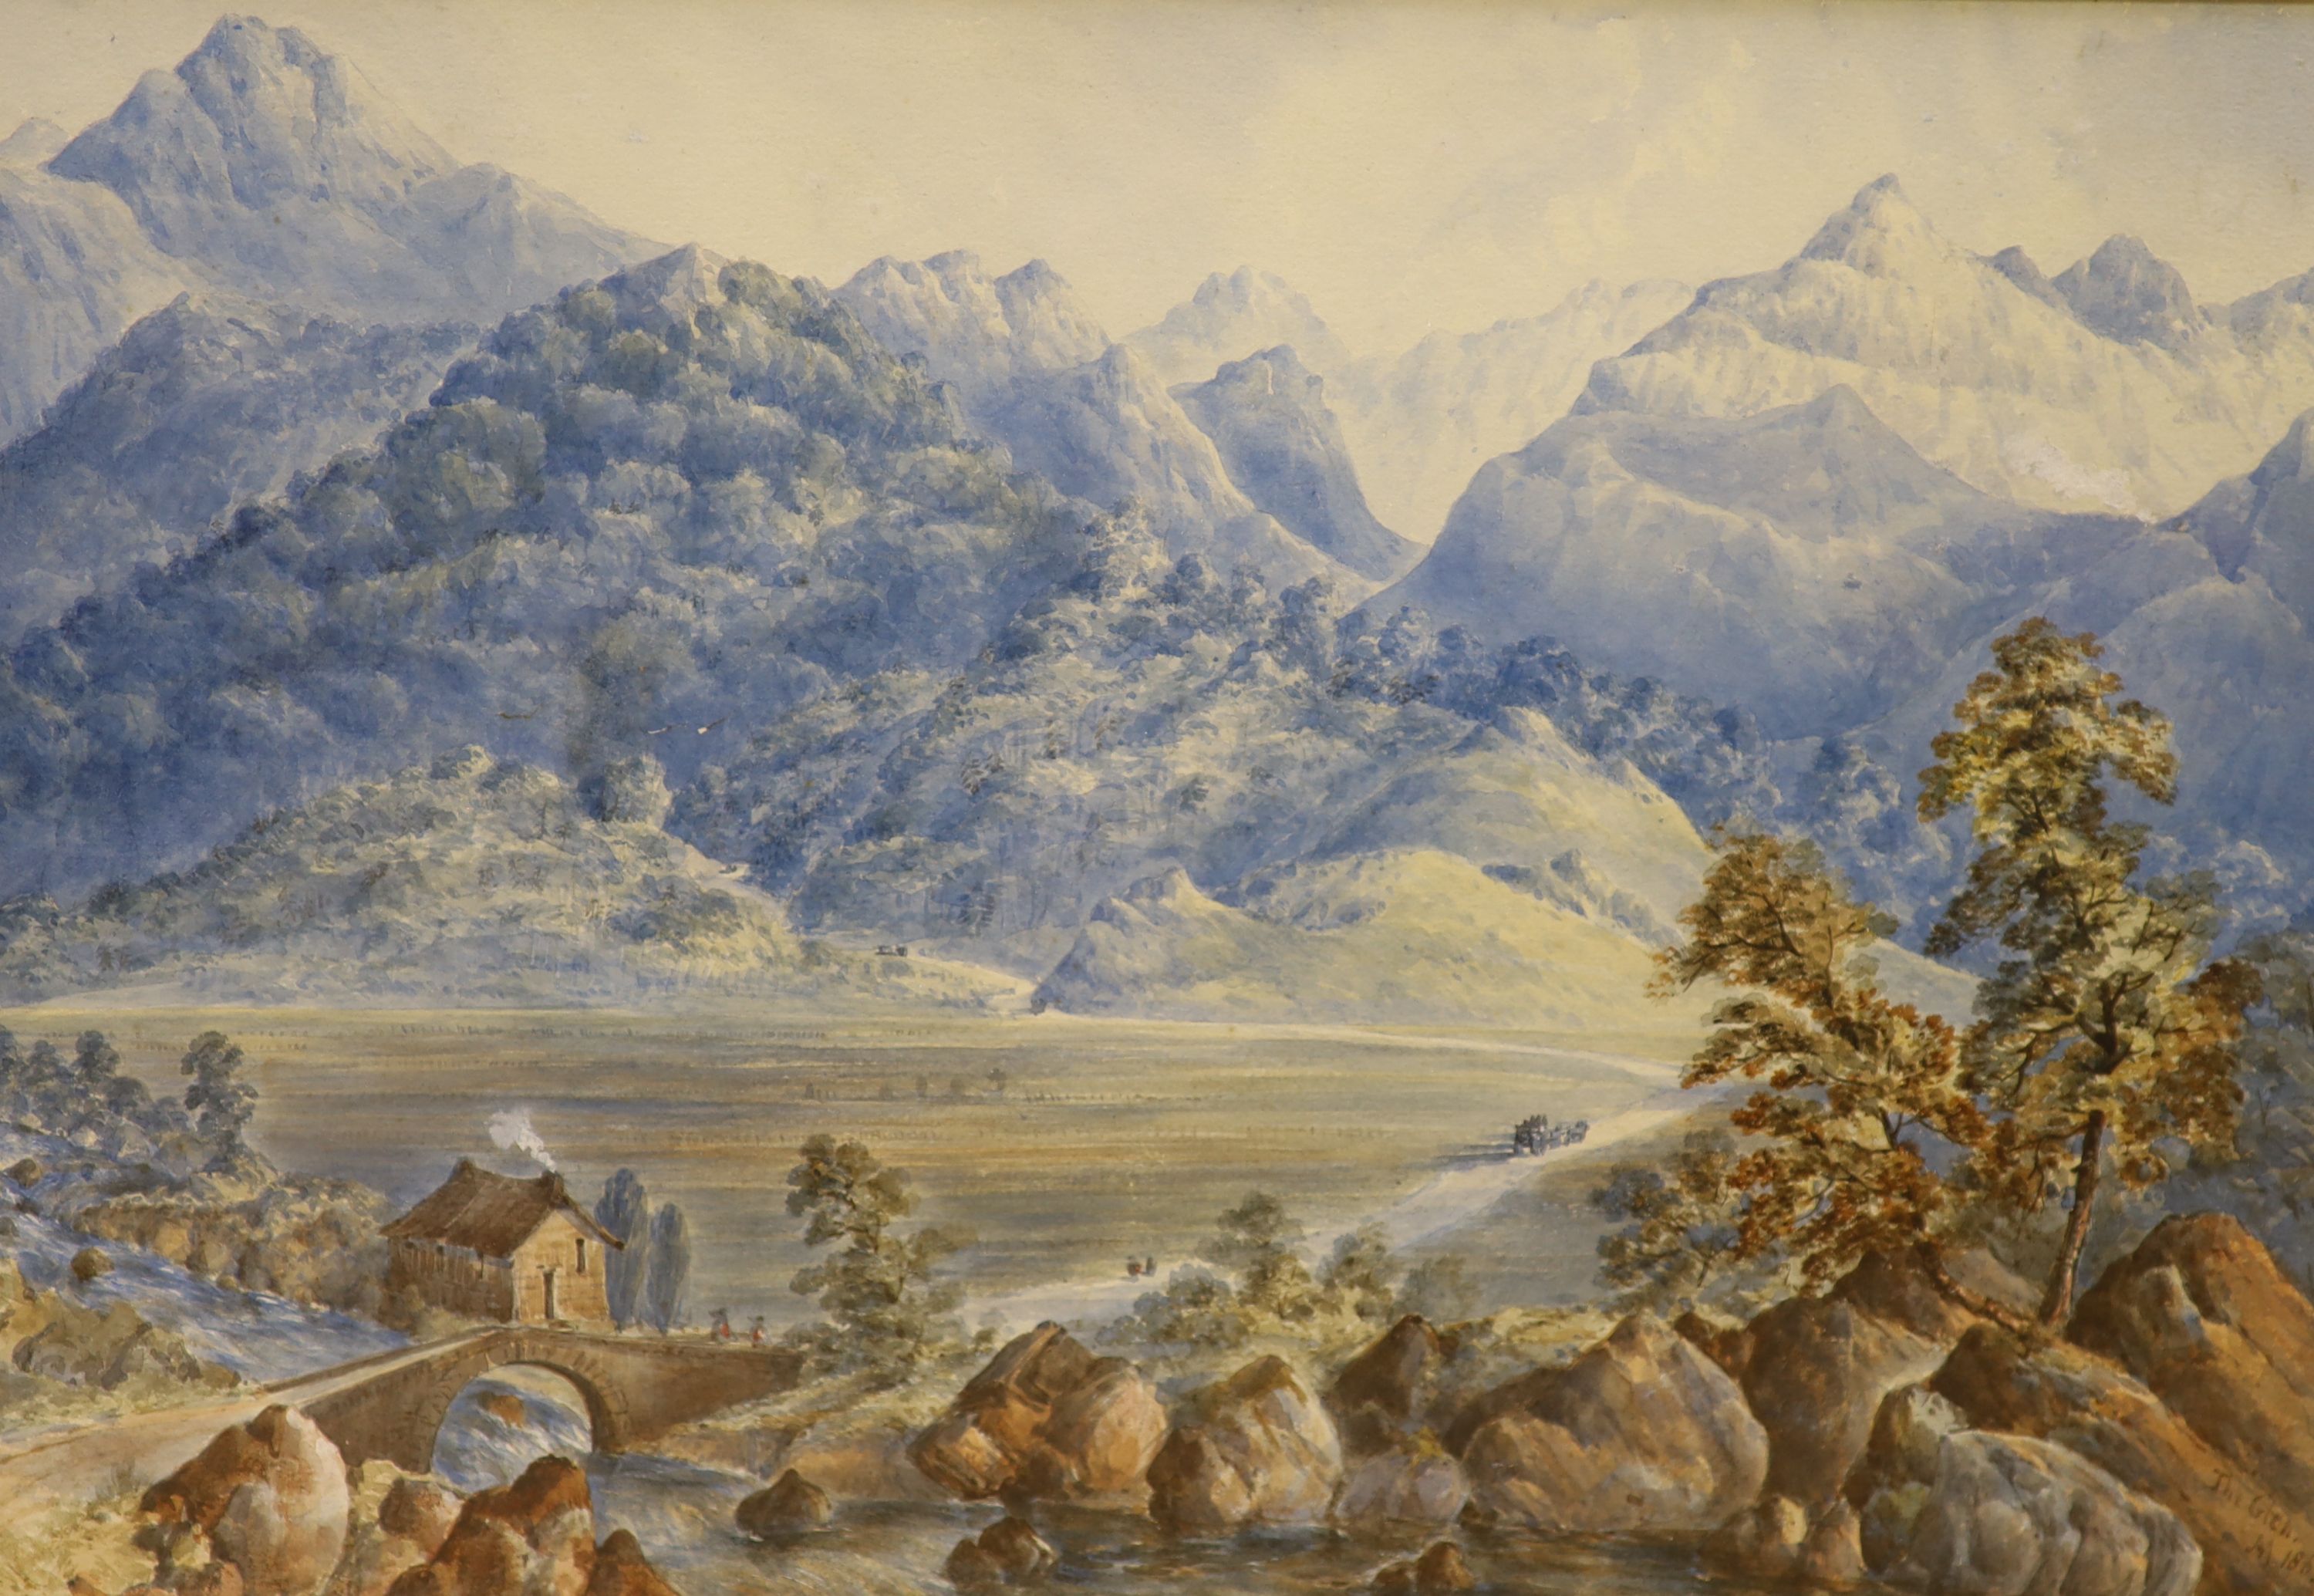 A.M. 19th century, watercolour, The Glen, monogrammed and dated 1863, 31 x 45cm and a 19th century English School, watercolour, Riverside country town, 30 x 44cm